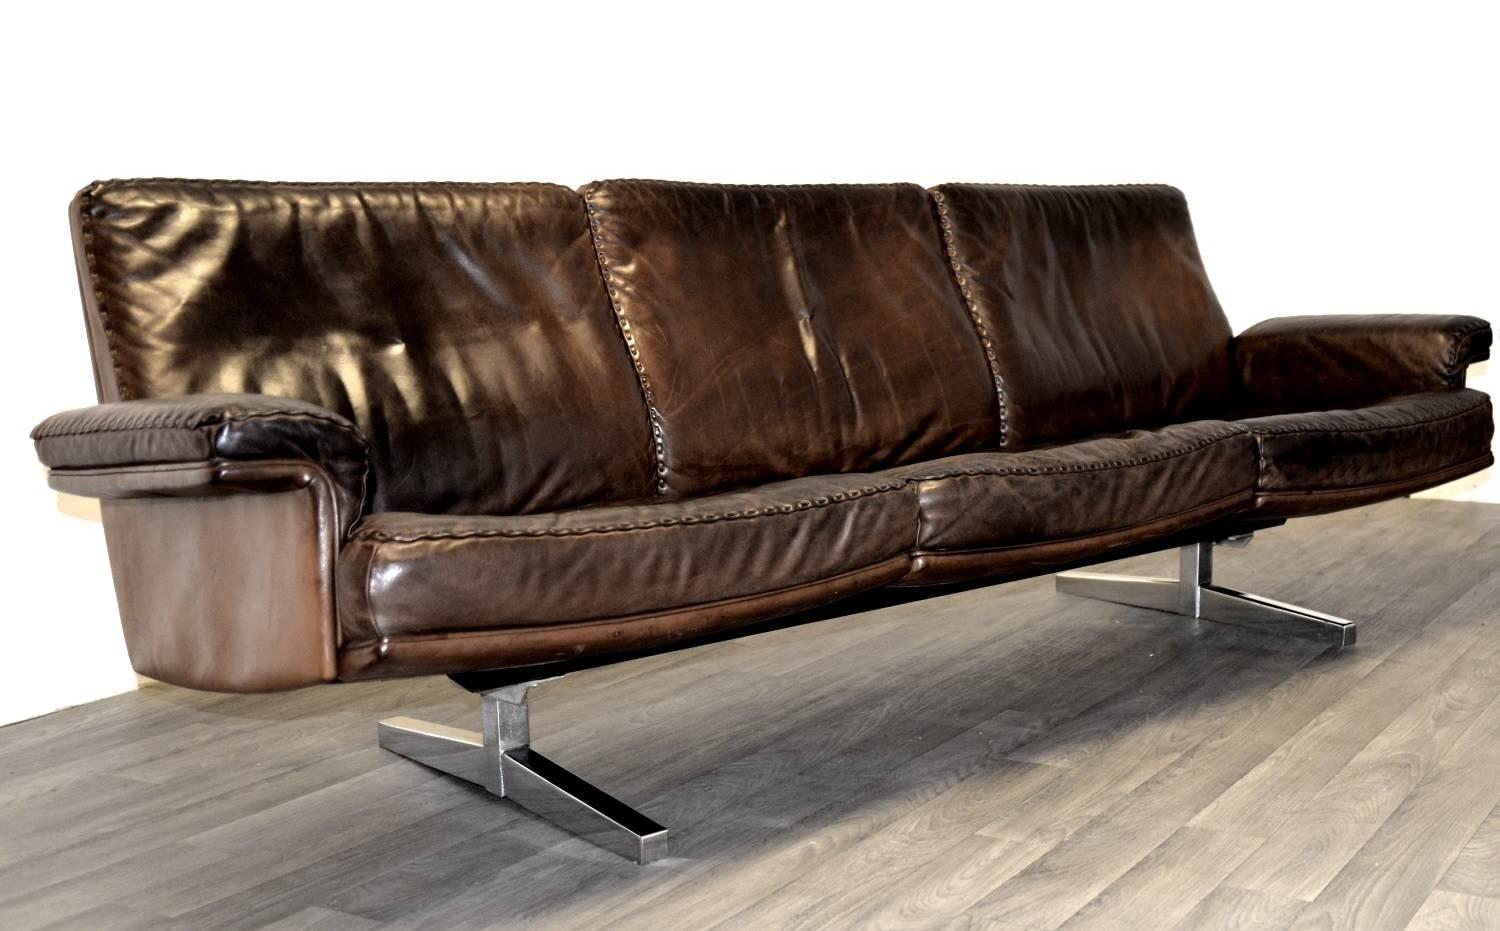 Discounted airfreight for our US and International Customers ( from 2 weeks door to door)

The Cambridge Chair Company brings to you a highly desirable ultra rare De Sede DS 35 three-seat leather sofa. Hand built in the late 1960s by De Sede